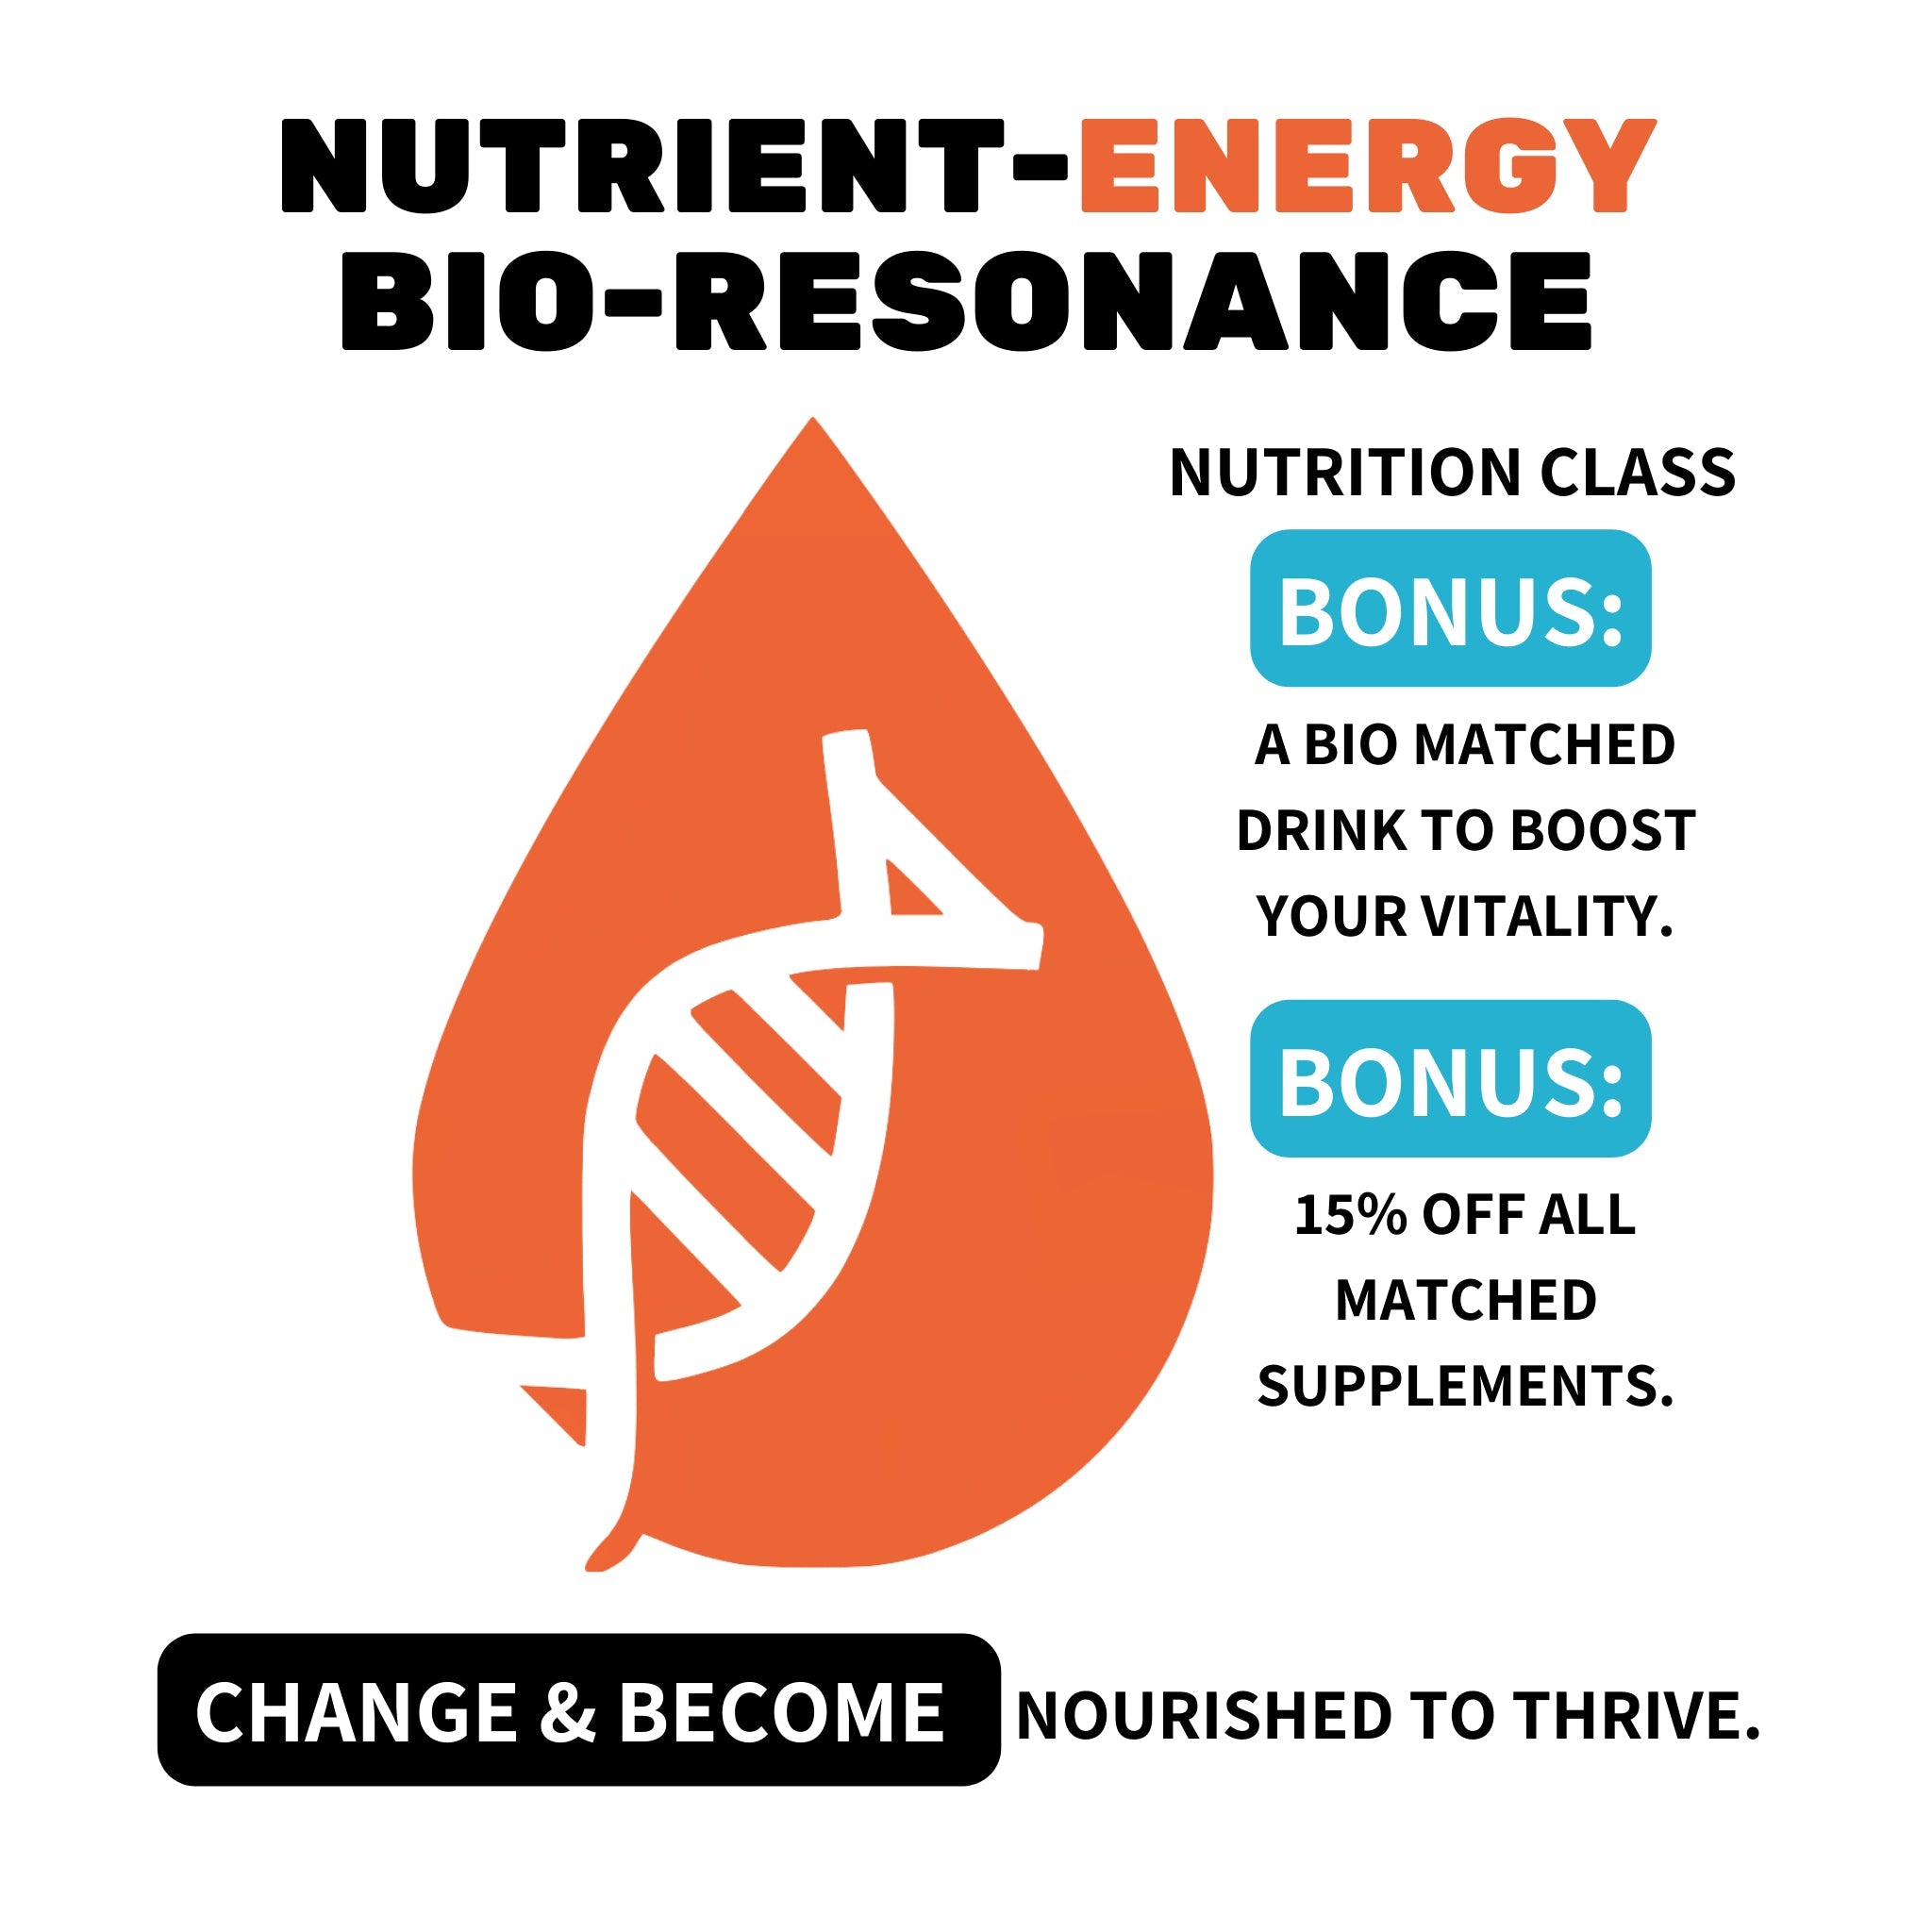 Bio Nutrition Gift - Quantum matches you to alkaline Water Fusions that restore your inner balance in 24hrs.